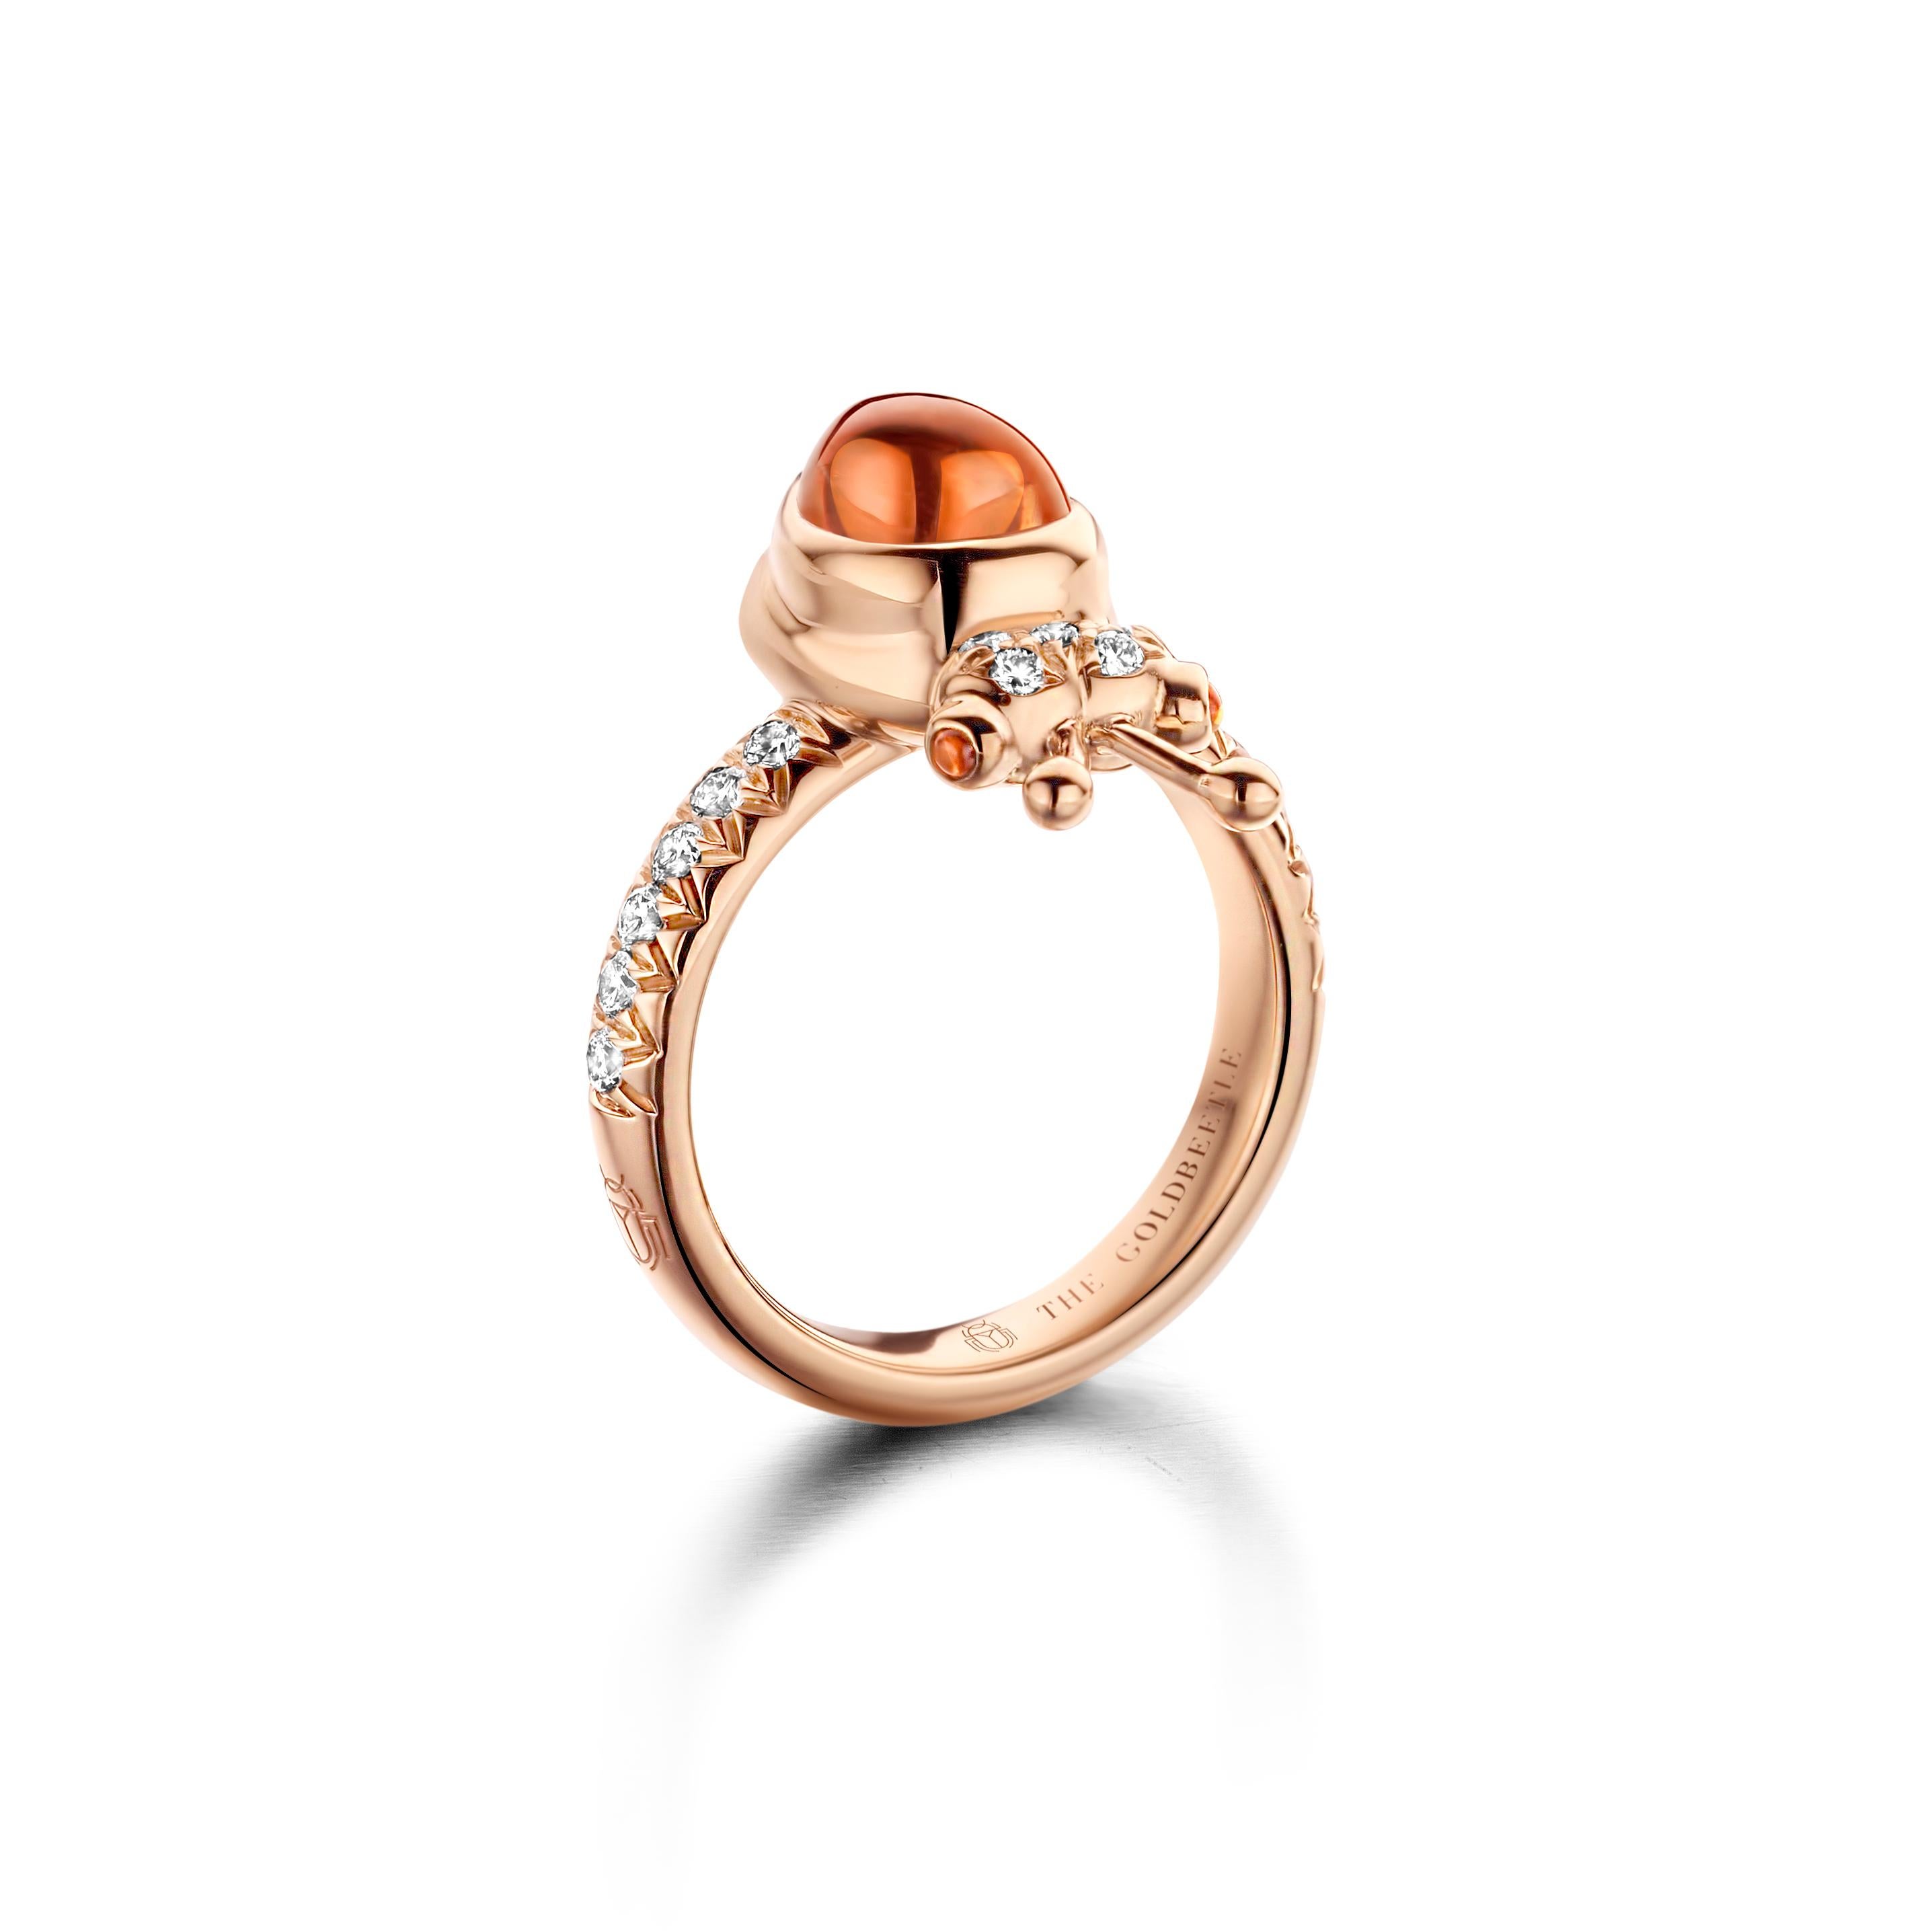 One of a kind lucky beetle ring in 18K rose gold 8,6 g set with the finest diamonds in brilliant cut 0,34Ct (VVS/DEF quality) one natural, mandarin garnet in pear cabochon cut 2,76Ct and two tsavorites in round cabochon cut. 

Celine Roelens, a